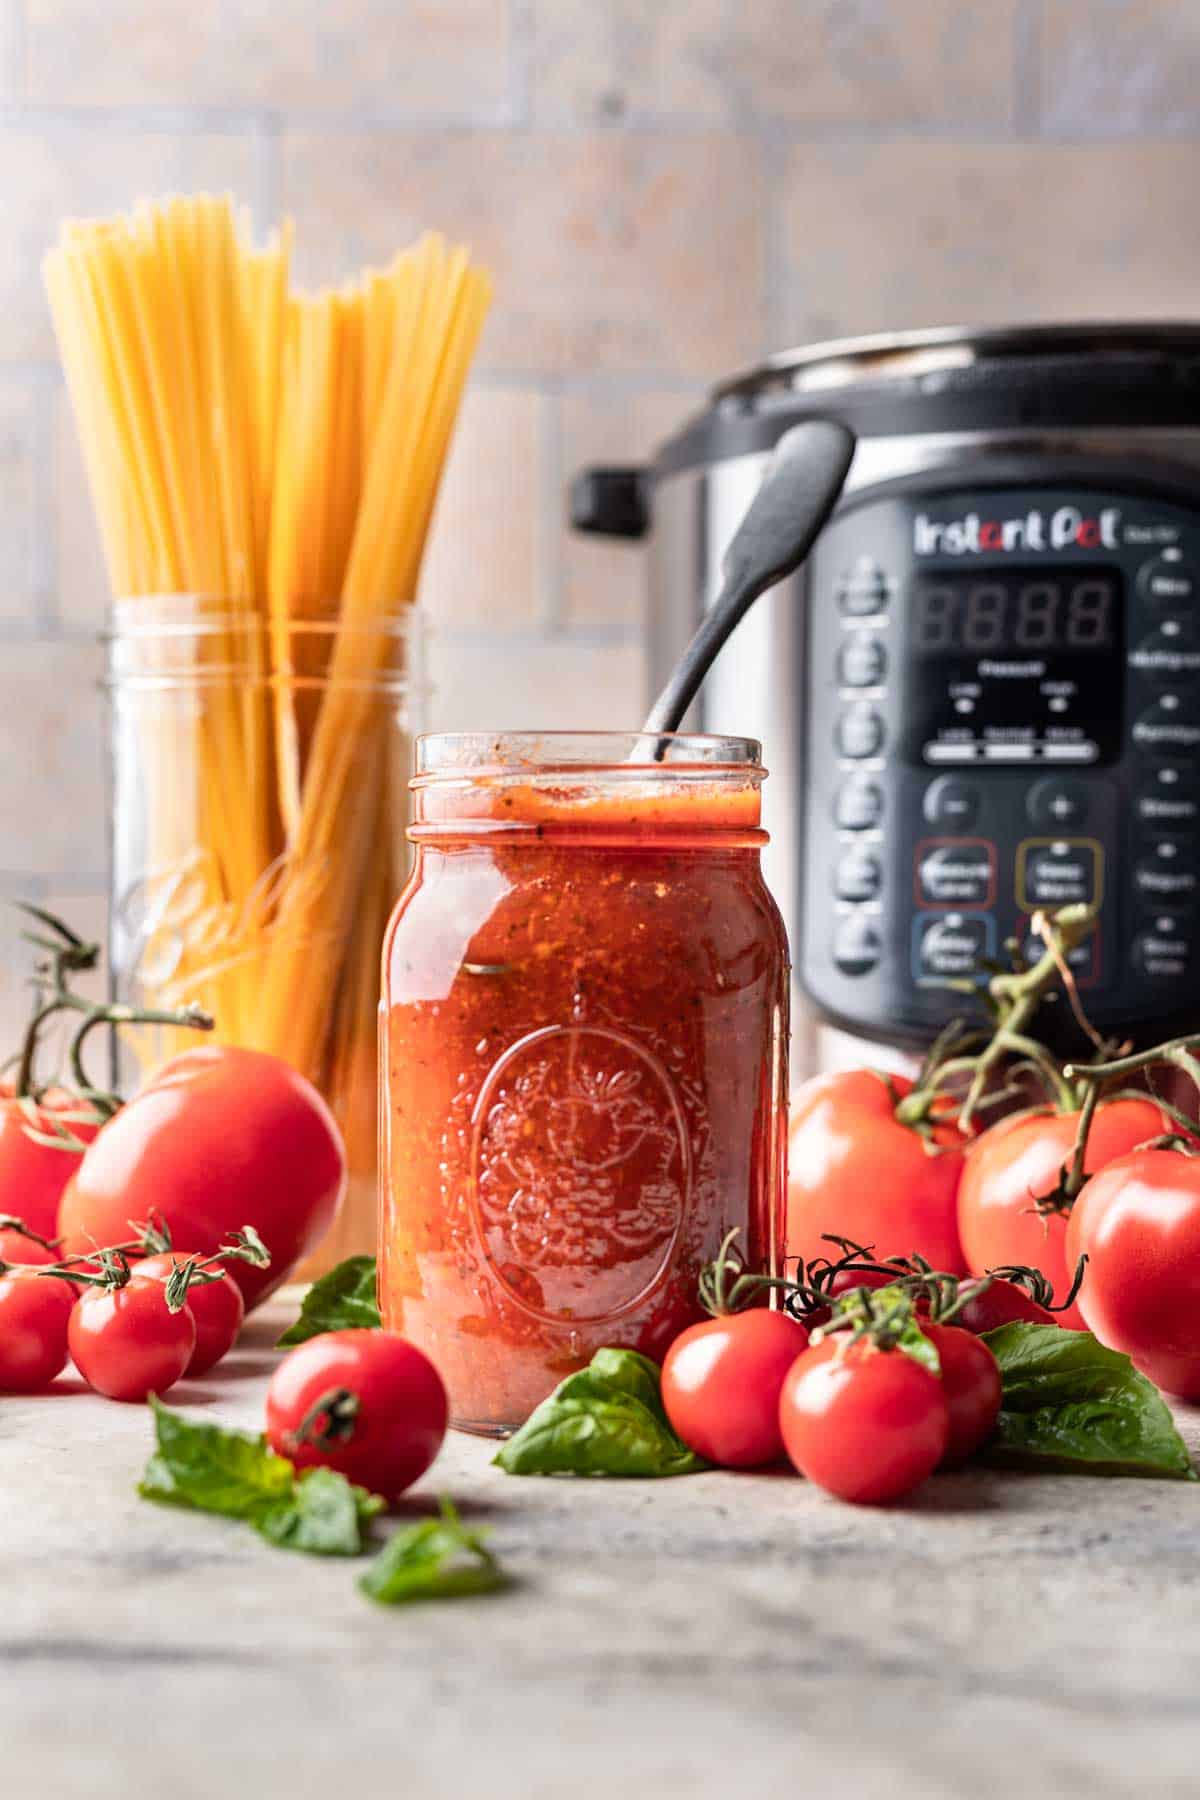 Instant pot tomato sauce in a jar with spaghetti noodles and tomatoes around it.